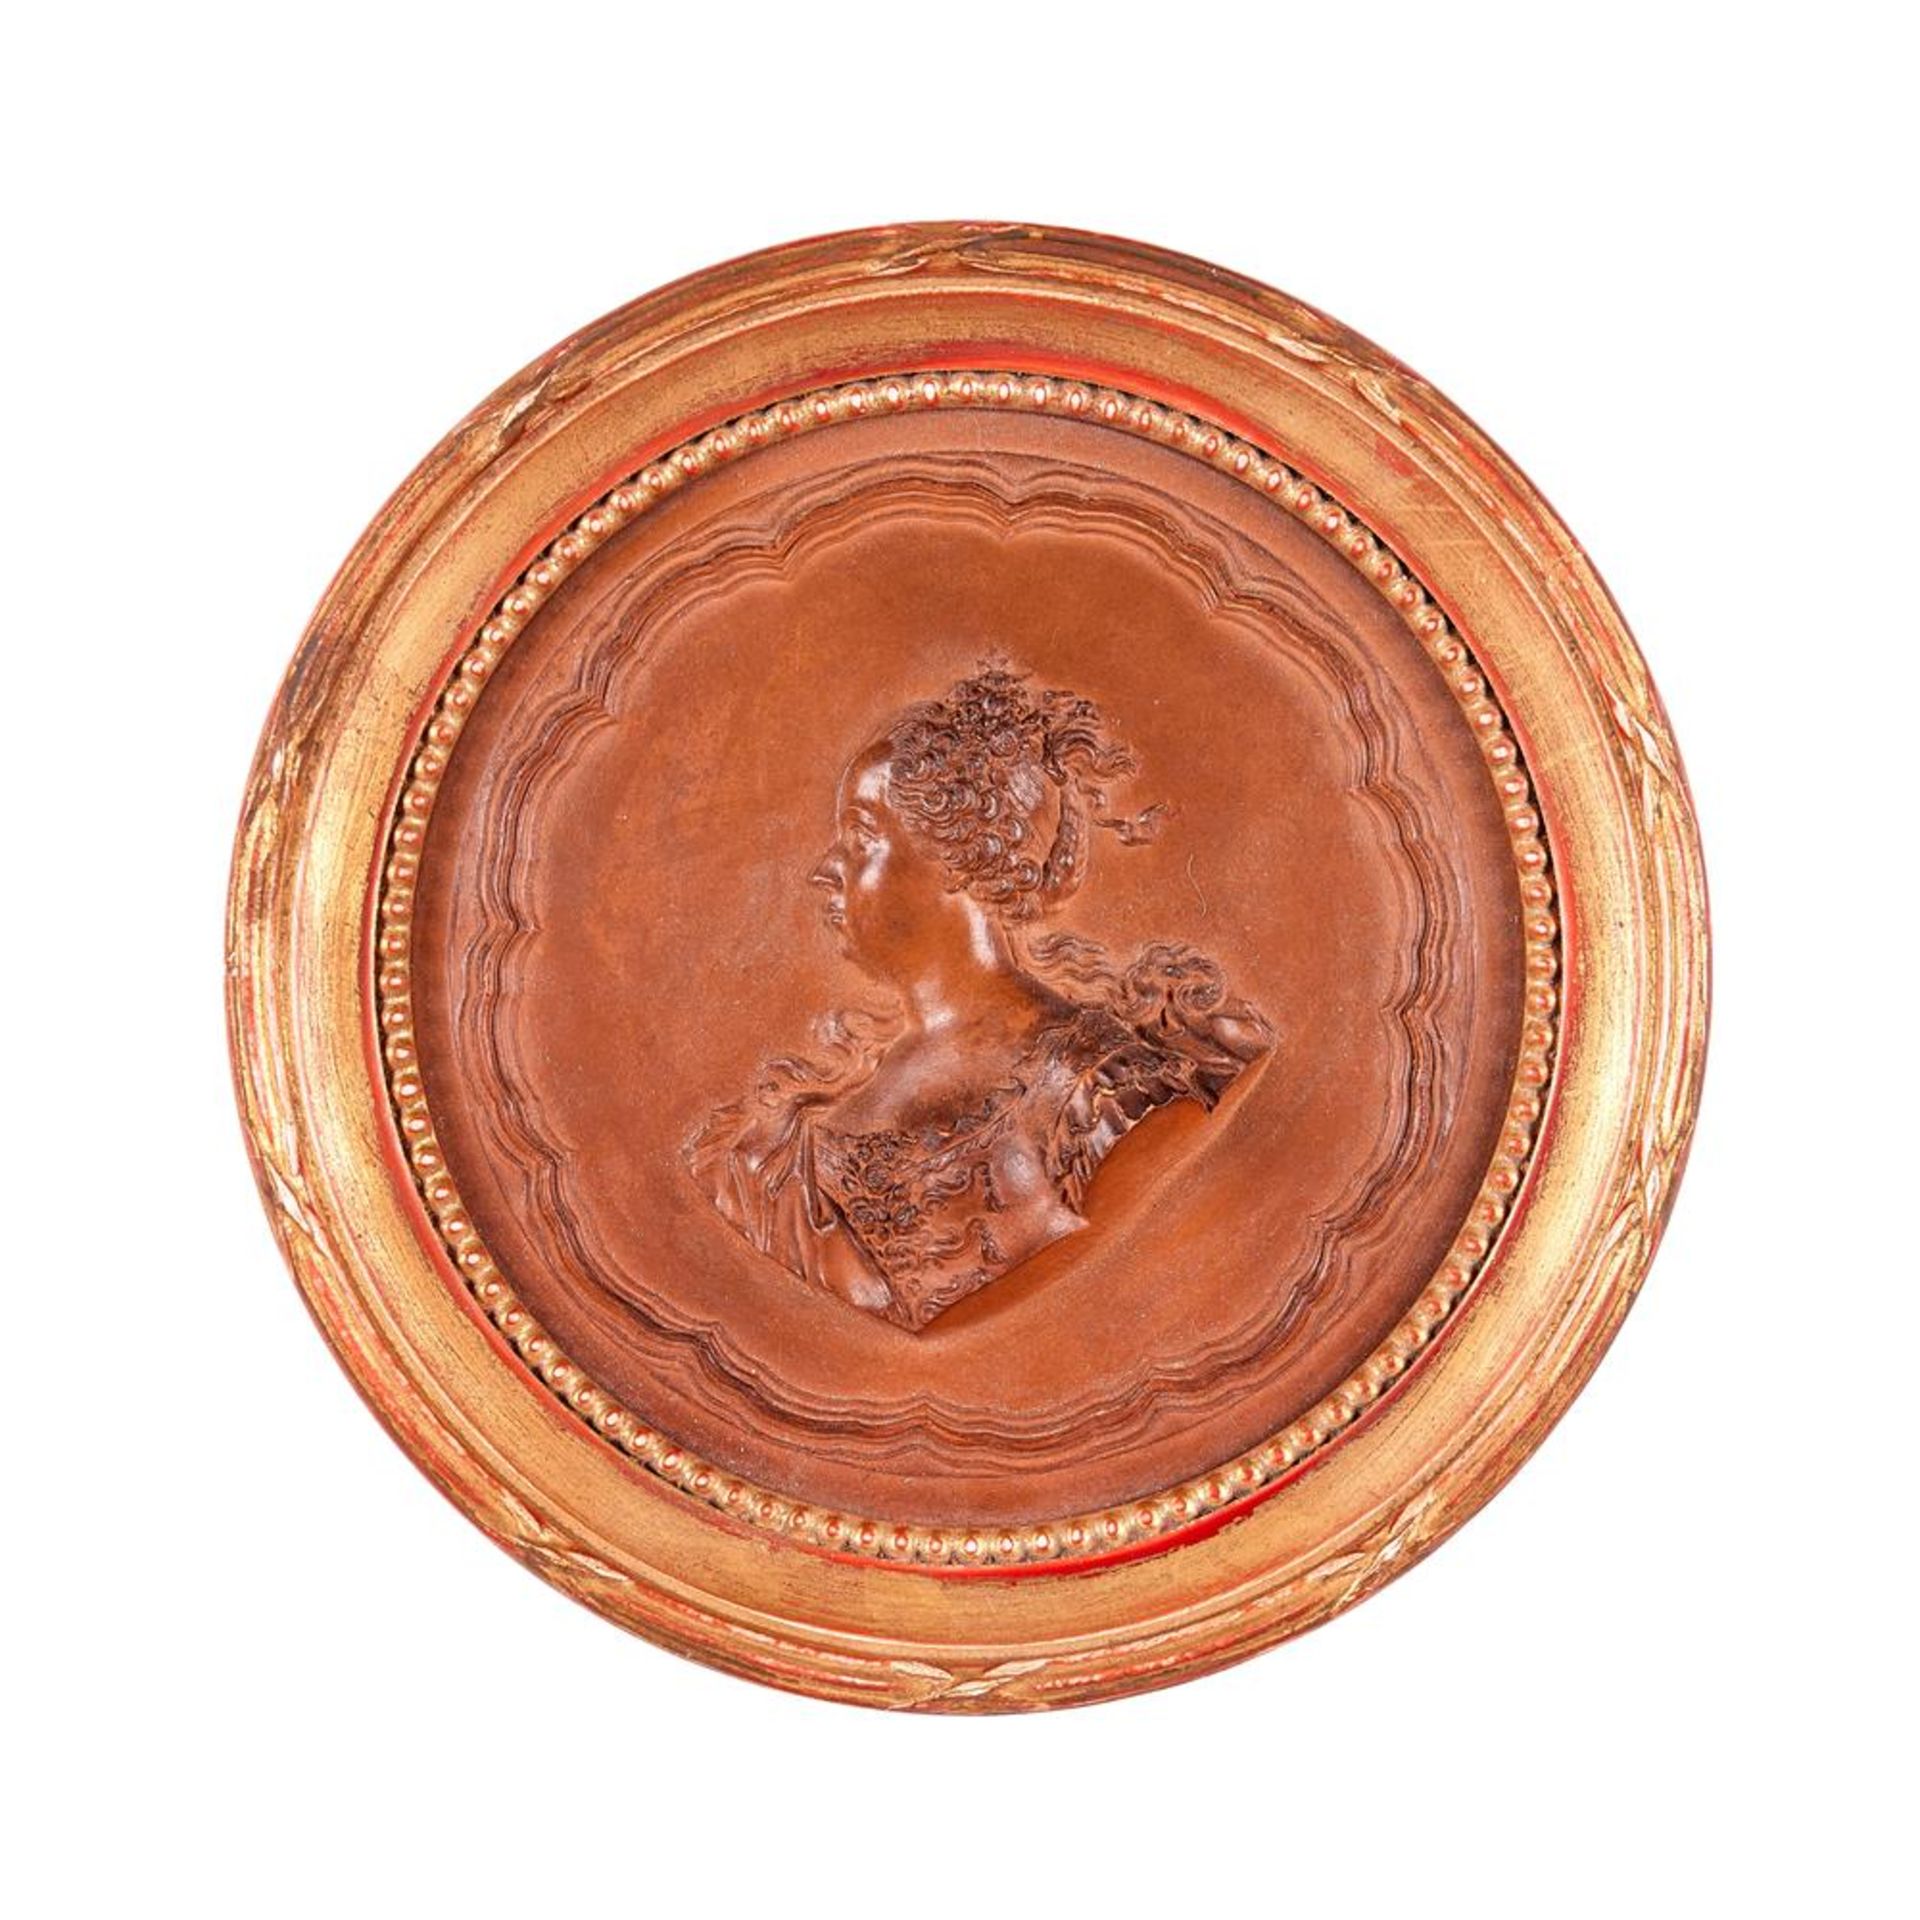 AFTER JEAN-BAPTISTE NINI (1717-1786) AND WORKSHOP- A SET OF THIRTEEN TERRACOTTA MEDALLIONS - Image 3 of 14